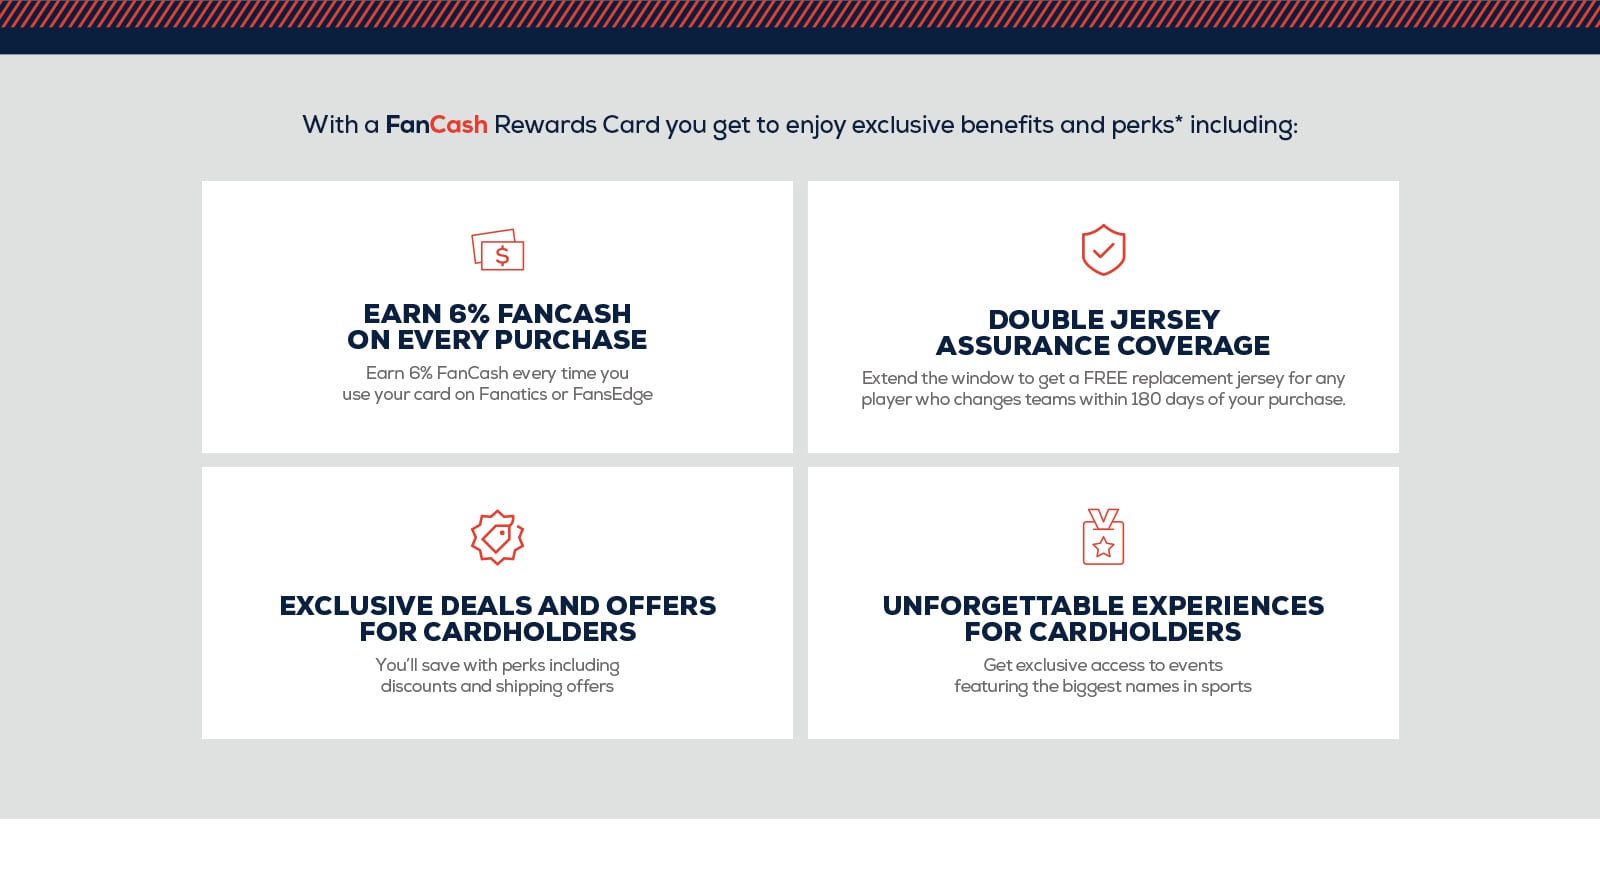 With a FanCash Rewards Card you get to enjoy exclusive benefits and perks including: Earn 6% FanCash on every purchase. Earn %5 every time you use your card on Fanatics or FansEdge. Double Jersey Assurance Coverage. Extend the window to get a FREE replacement jersey for any player who changes teams within 180 days of your purchase. Exclusive deals and offers for cardholders. You'll save even more with perks including discounts and shipping offers. Unforgettable experiences for cardholders. Get exclusive access to events featuring the biggest names in sports.